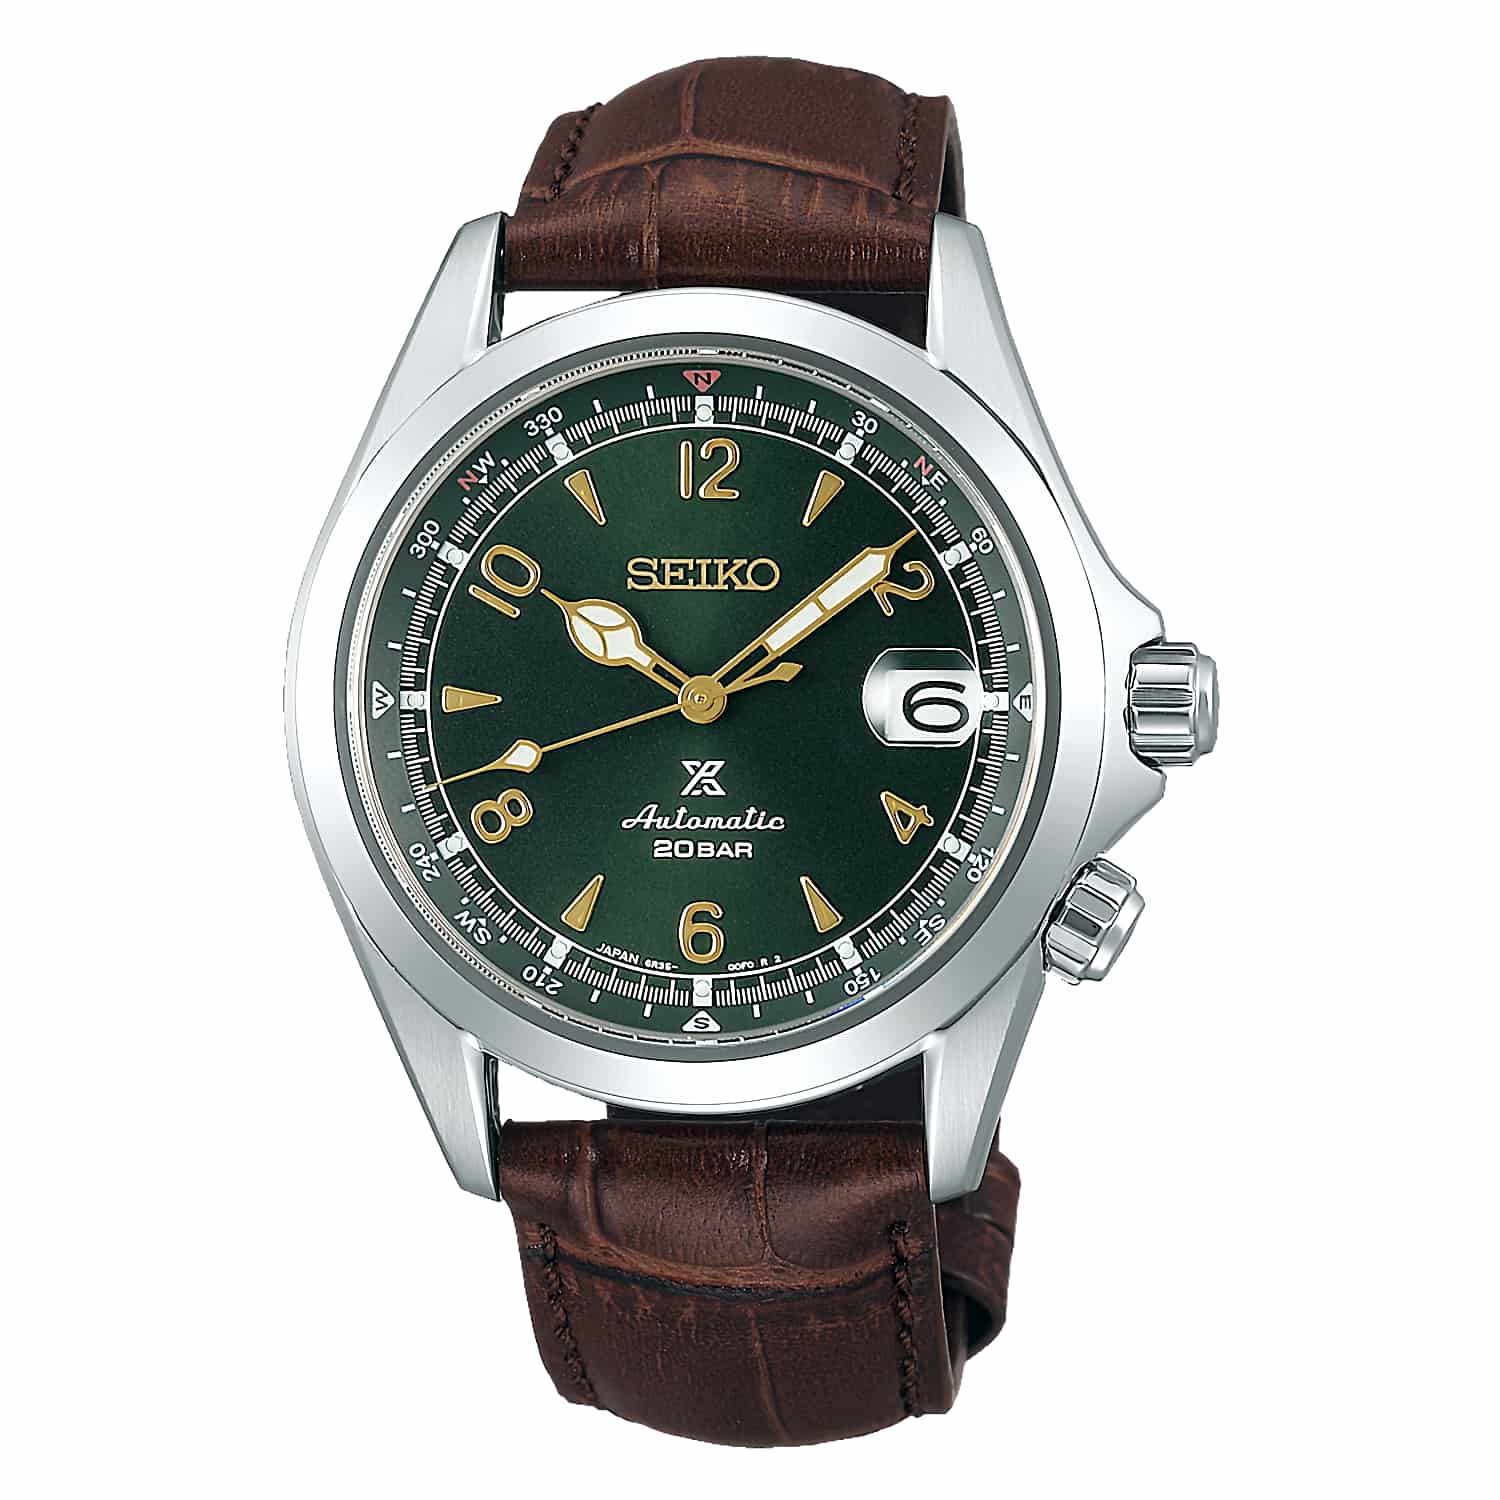 SPB121J1 SEIKO Prospex Alpinist Green Watch. The newest Alpinist Green SPB121J1 joins the pioneers to have a new movement; powered by Seiko’s latest automatic caliber, 6R35, which is an upgrade from the workhorse 6R15. It still operates at 21,600 BPH (3 H